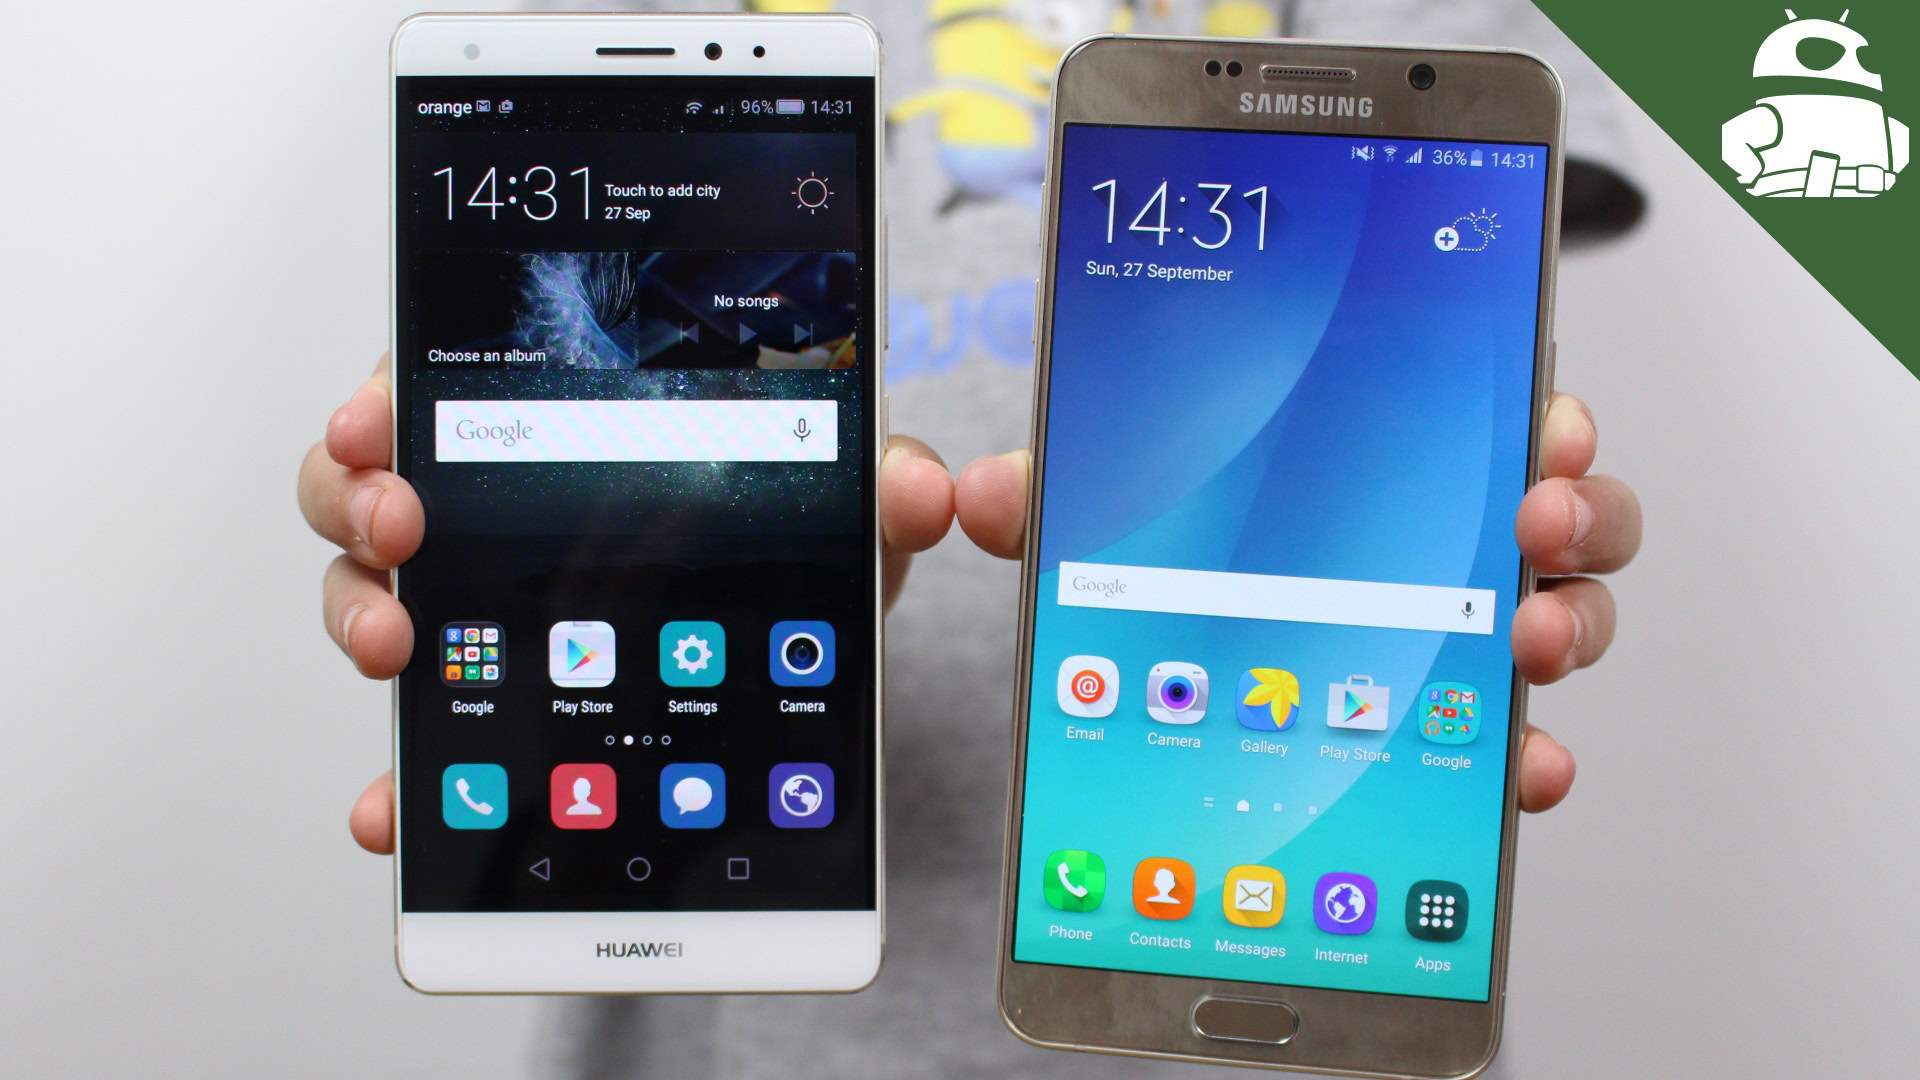 Galaxy Note vs HUAWEI Mate S - quick look